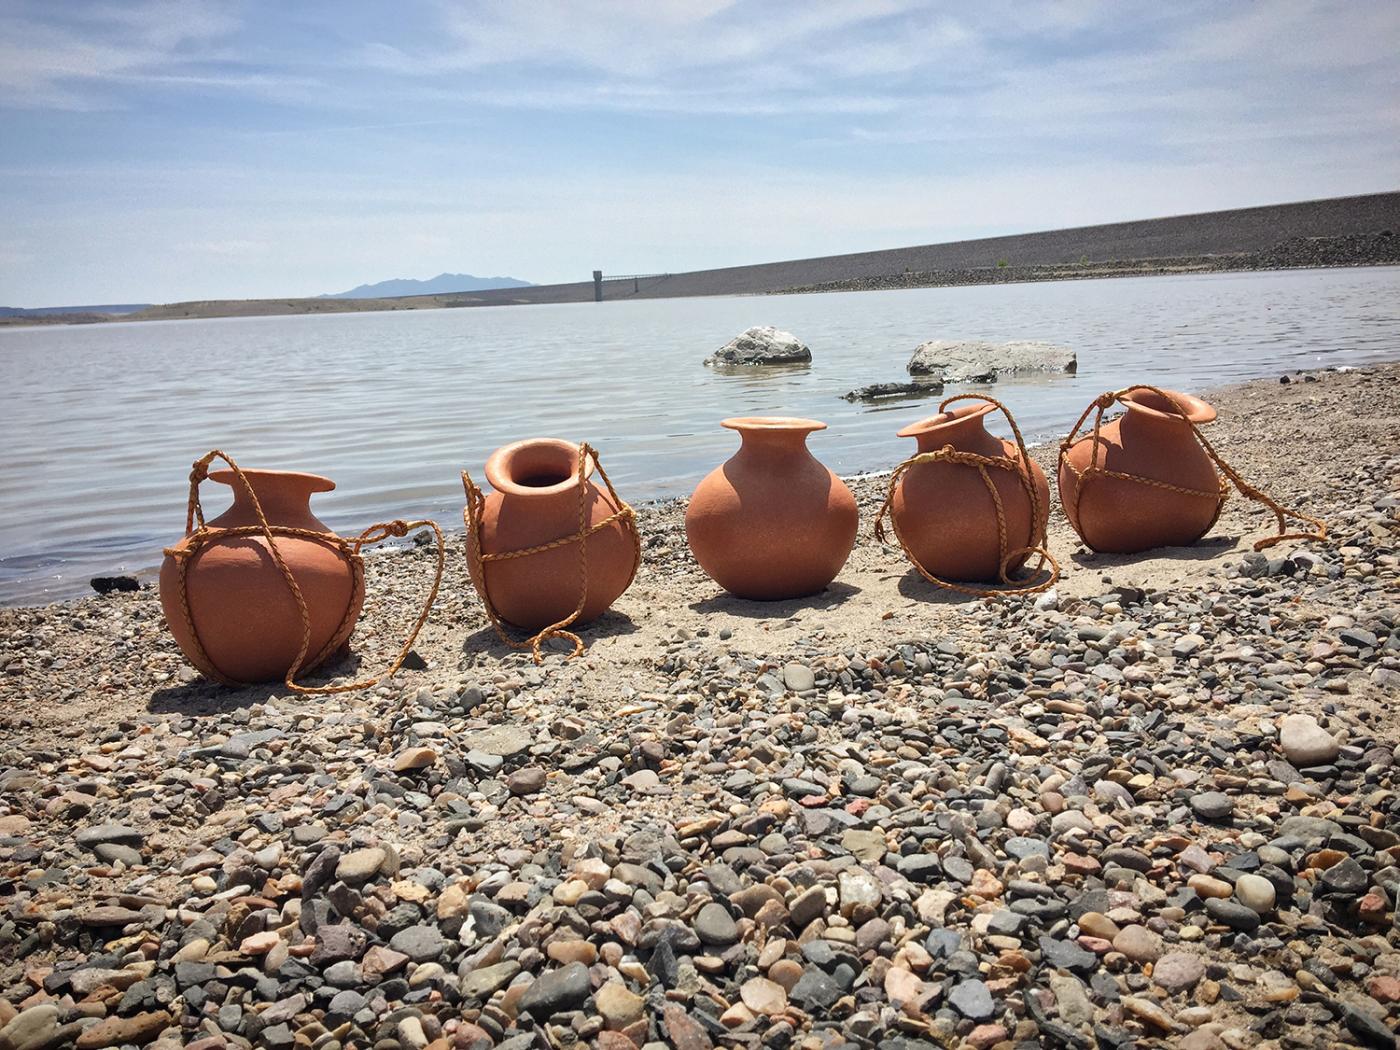 Ceramic water jugs, tied together with a rope, rest on a rocky beach.